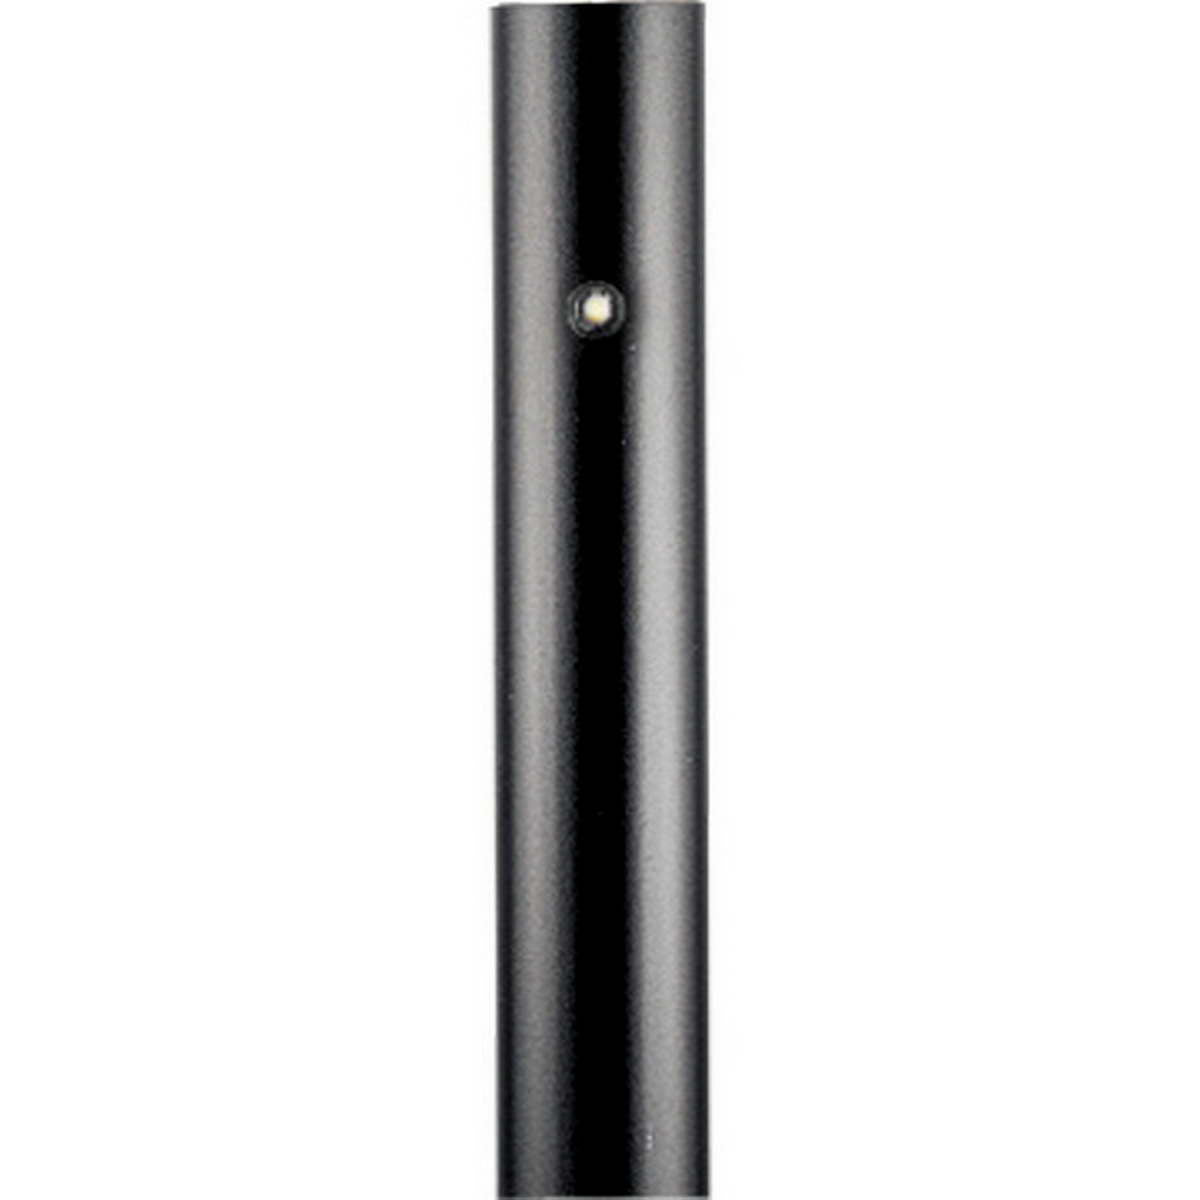 7 Ft Round Aluminum Direct Burial Pole with Photocell 3 In. Shaft Black Finish - Bees Lighting